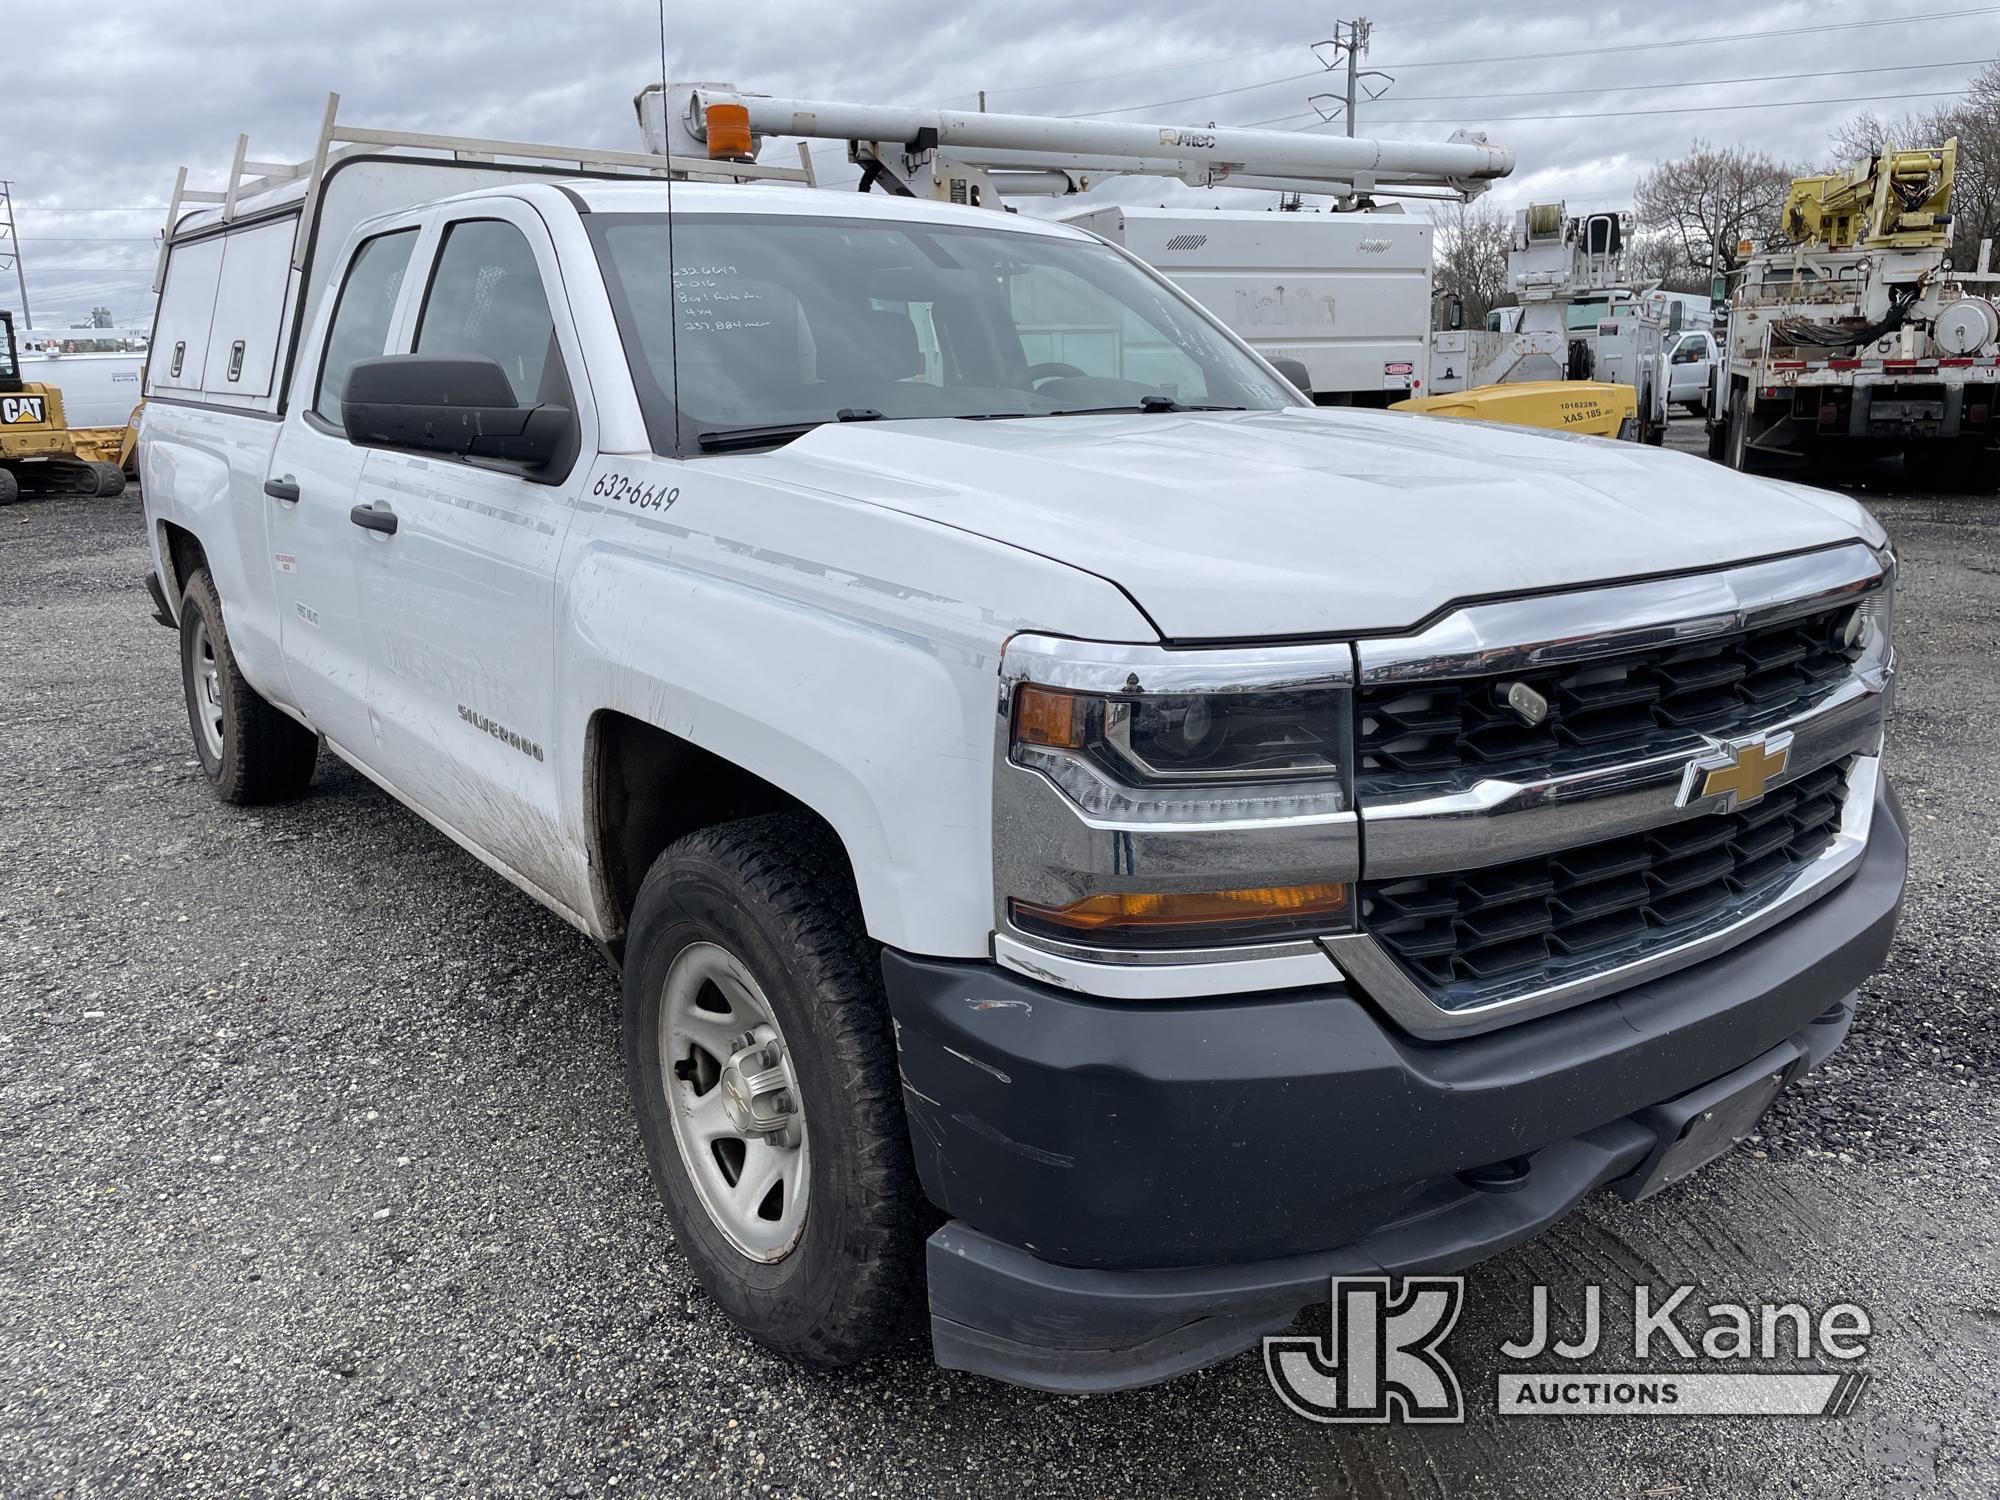 (Plymouth Meeting, PA) 2016 Chevrolet Silverado 1500 4x4 Extended-Cab Pickup Truck Bad Trans. Needs